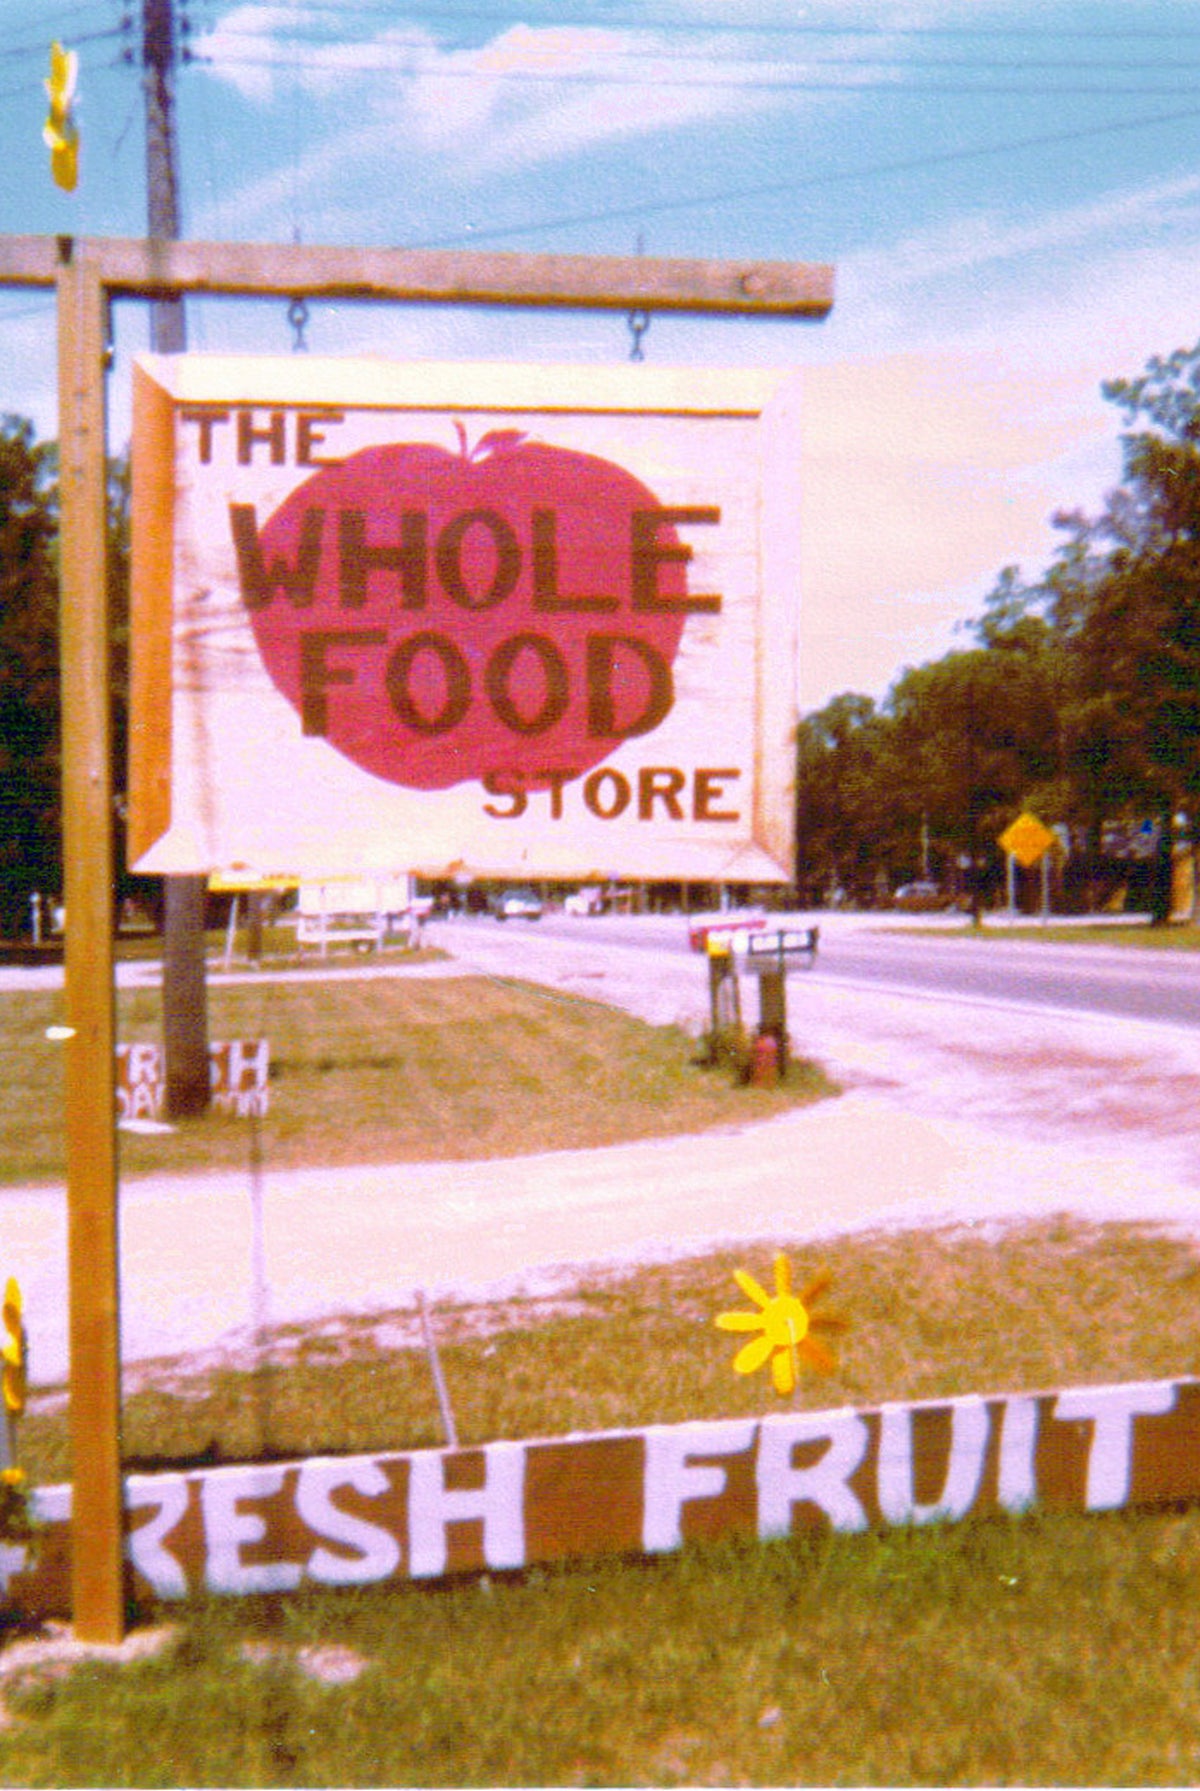 A roadside sign noting The Whole Food Store and Fresh Fruit